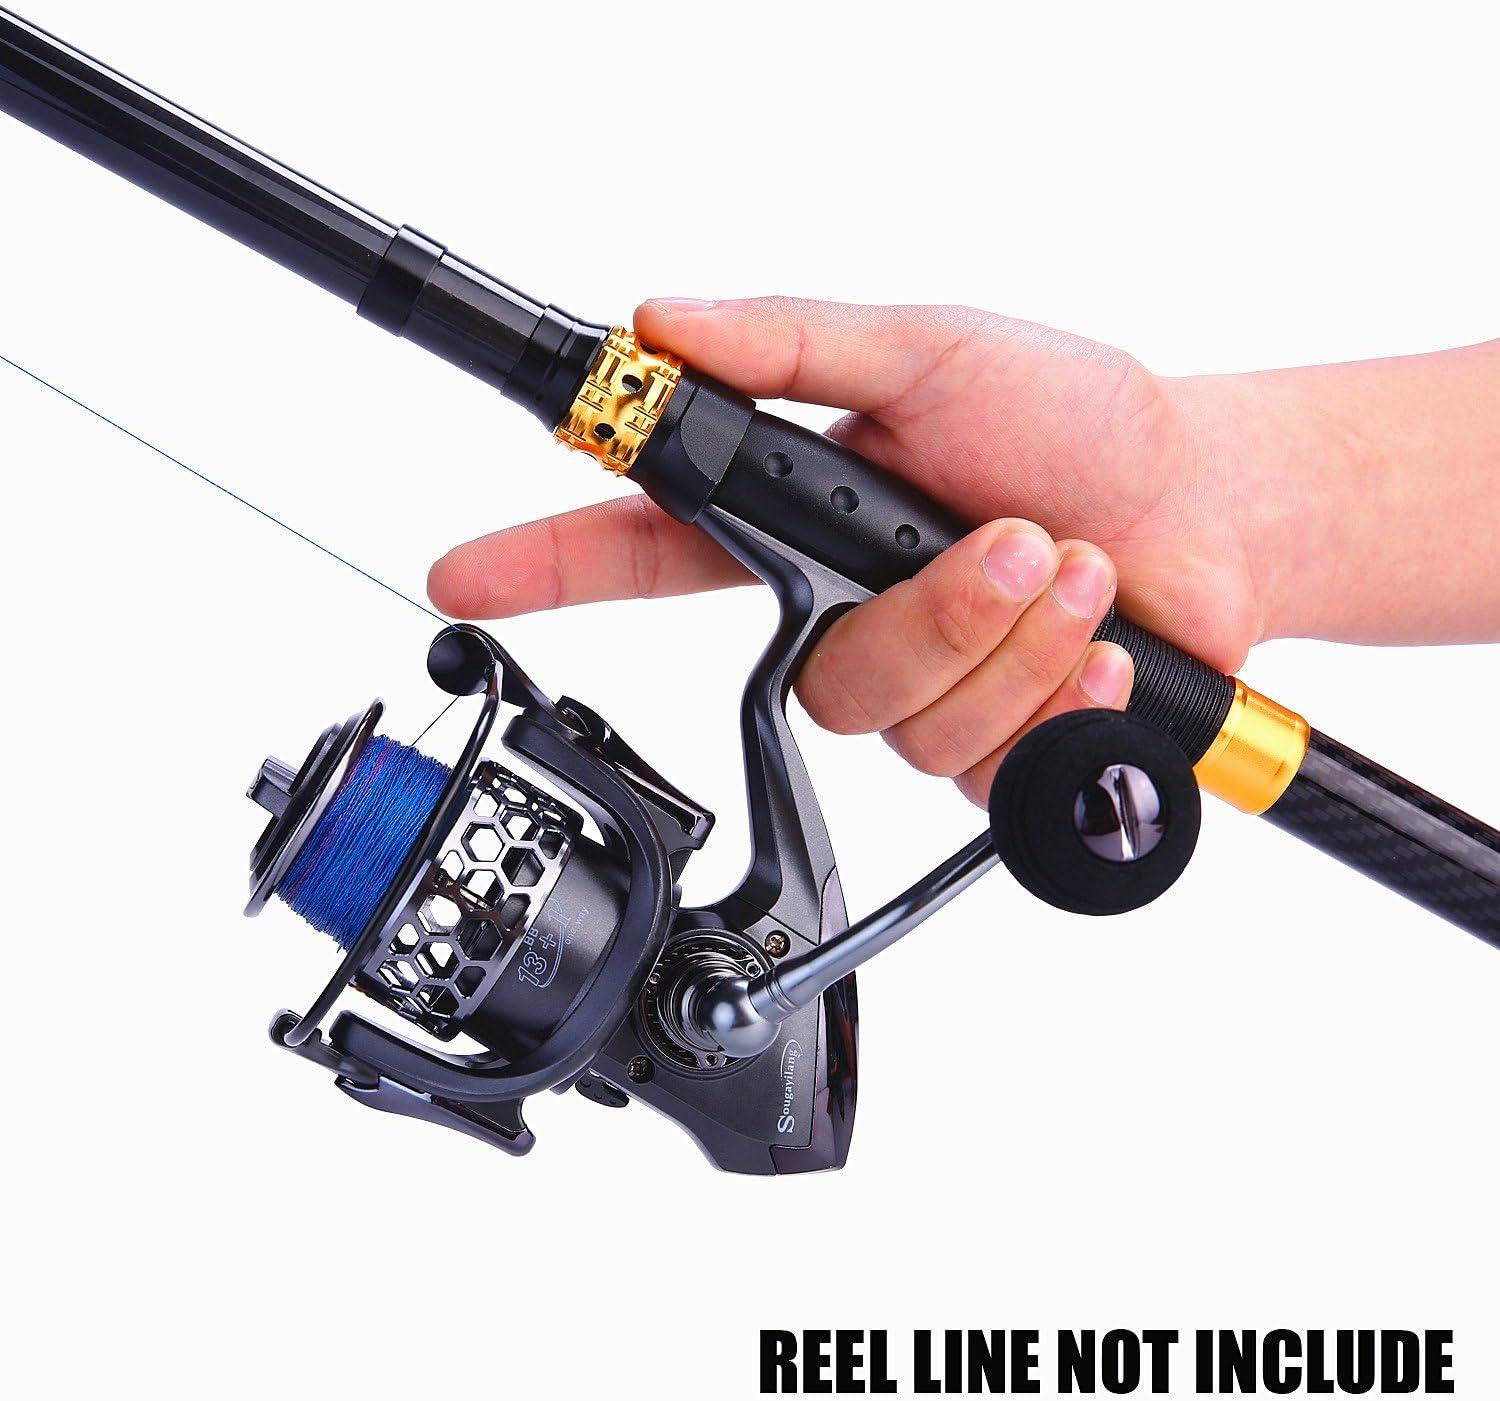 Sougayilang Telescopic Fishing Rod - 24 Ton Carbon Fiber Ultralight Fishing  Pole with CNC Reel Seat, Portable Retractable Handle, Stainless Steel  Guides for Bass Salmon Trout Fishing 1.8m/5.9ft